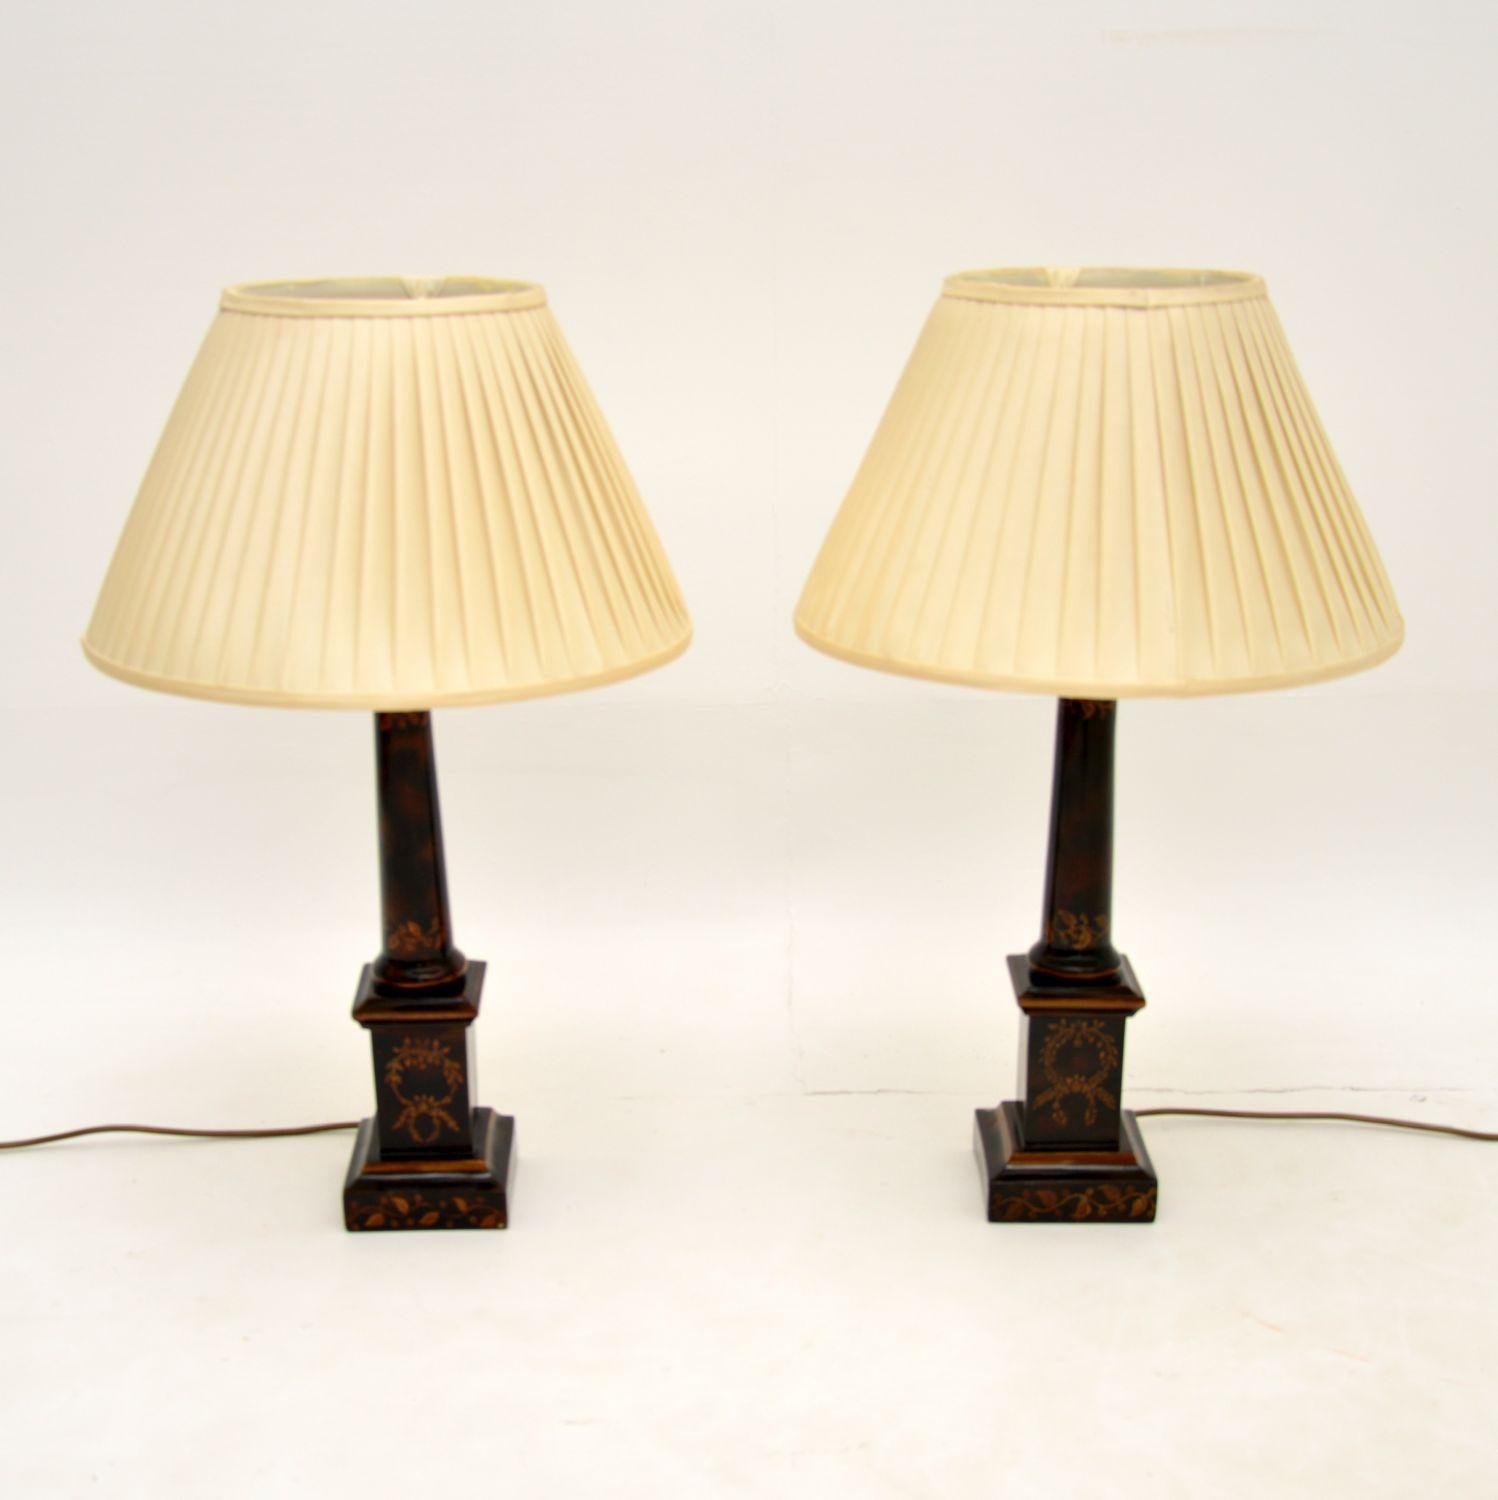 English Pair of Antique Neoclassical Style Table Lamps